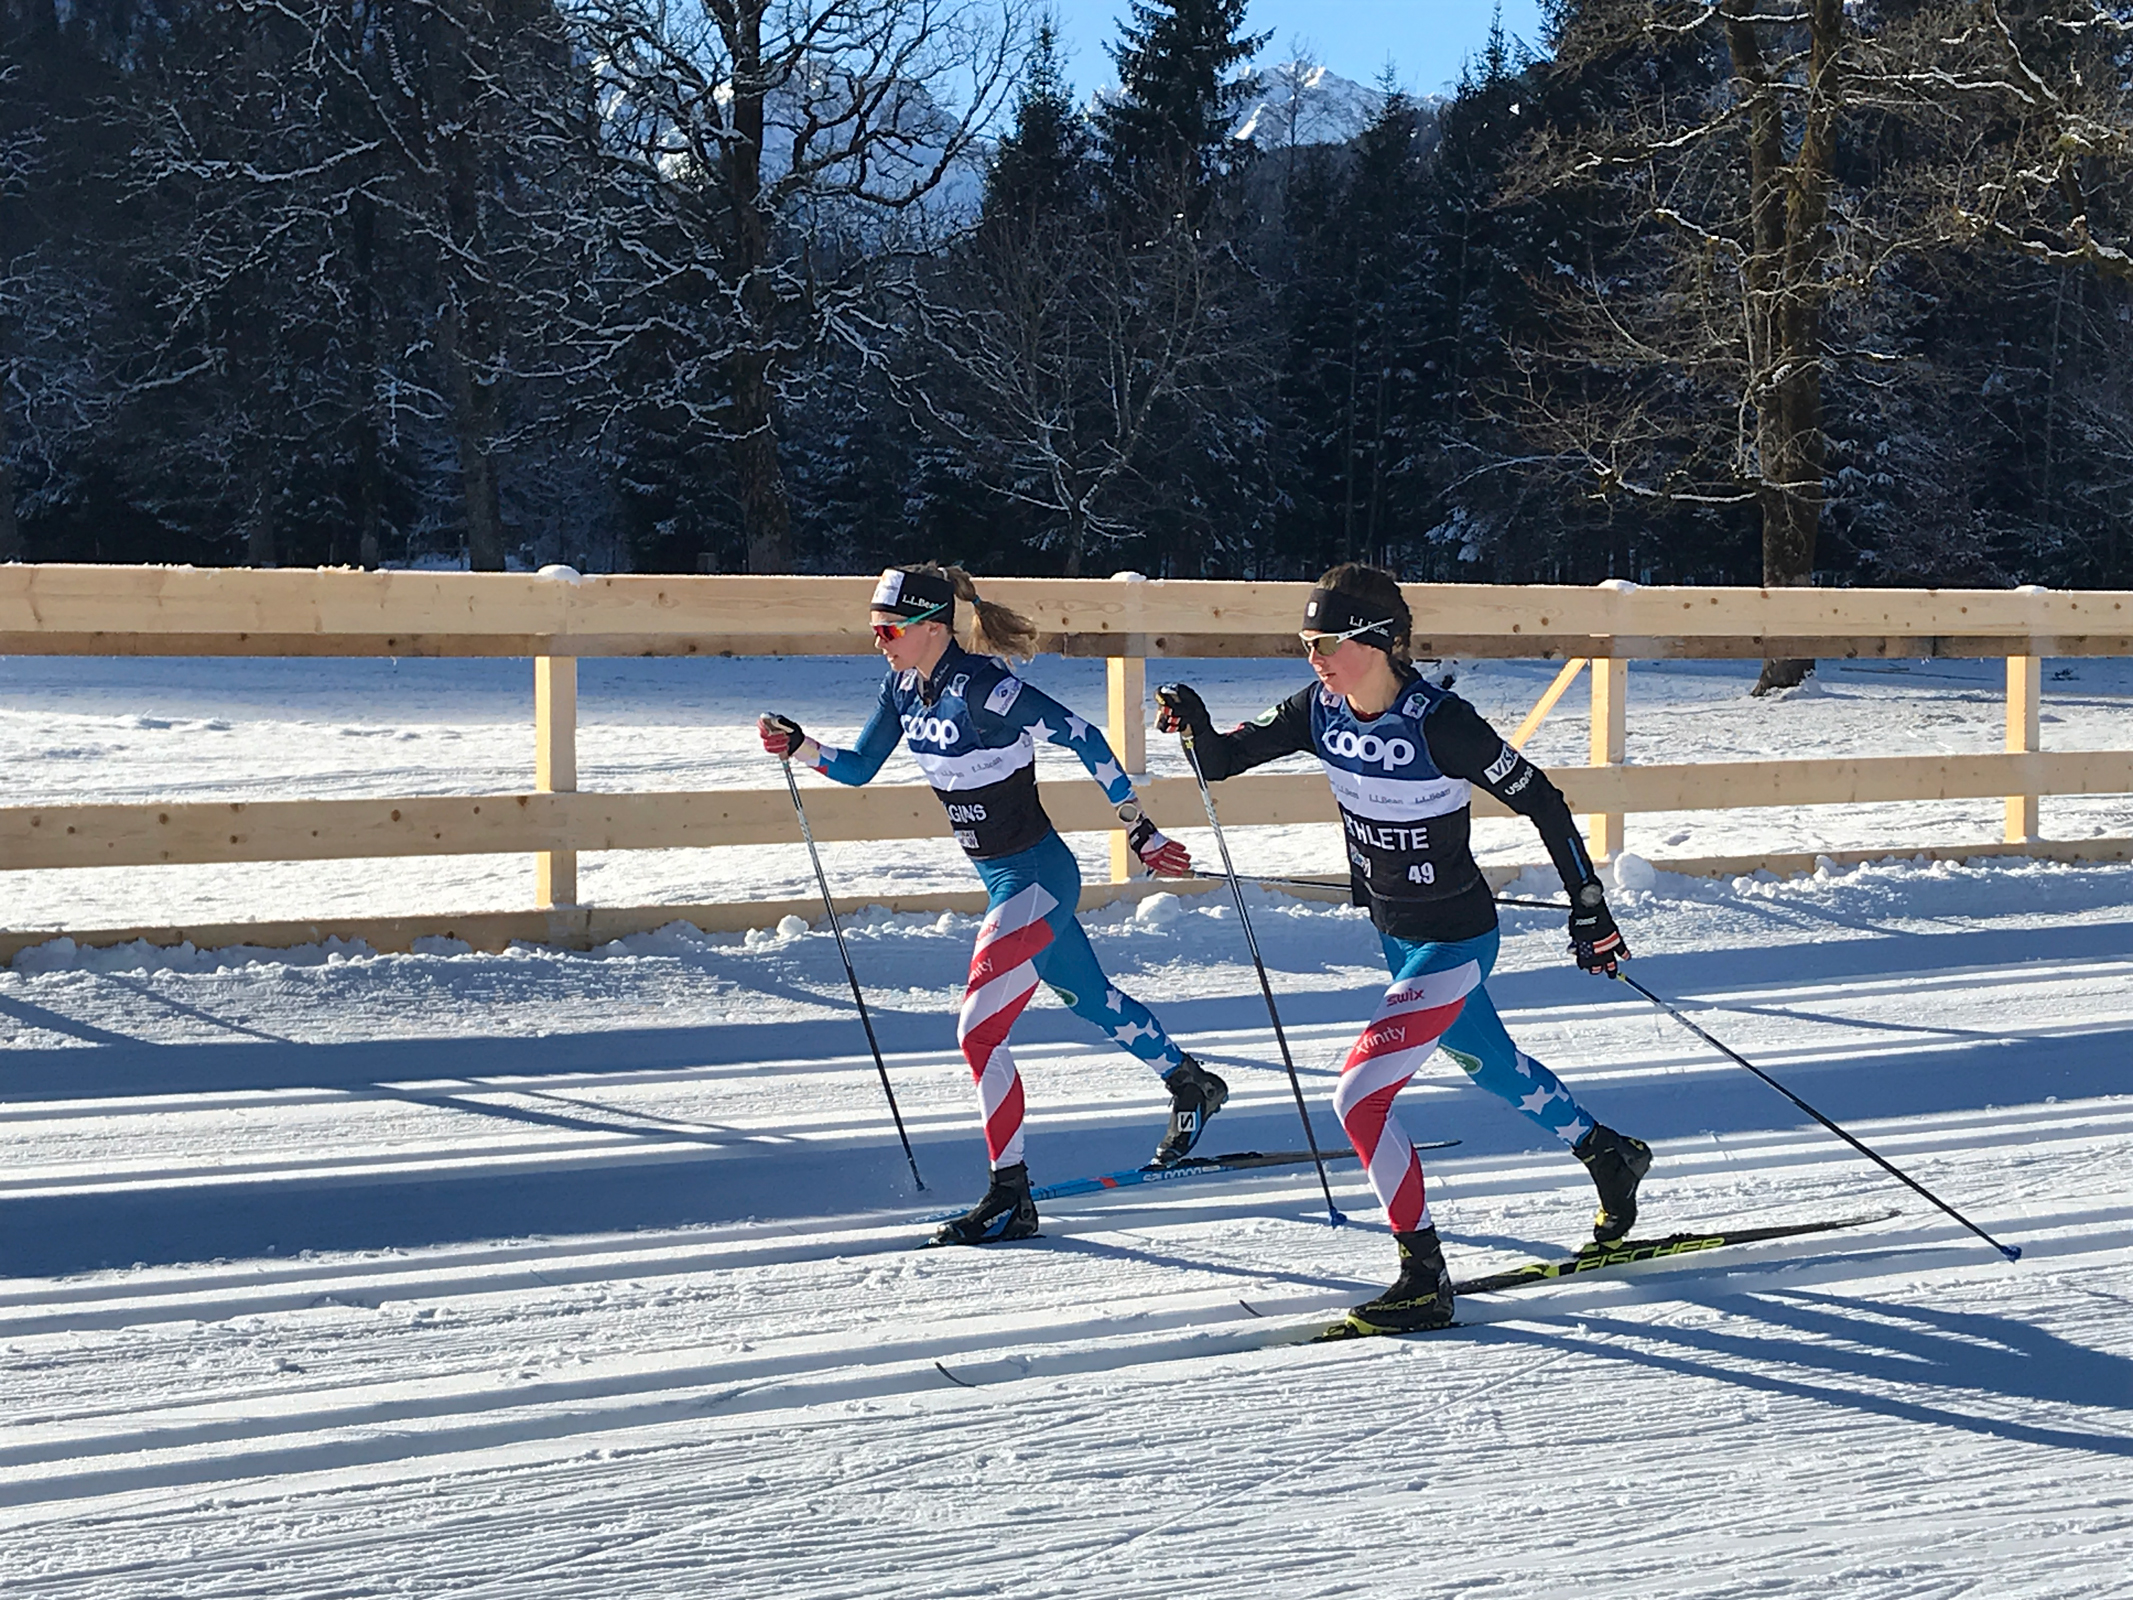 Jessie Diggins and Caitlin Paterson previewed portions of the skiathlon course in Oberstdorf, Germany, Wednesday ahead of this weekend's FIS Cross Country World Cup (U.S. Ski & Snowboard - Tom Horrocks)